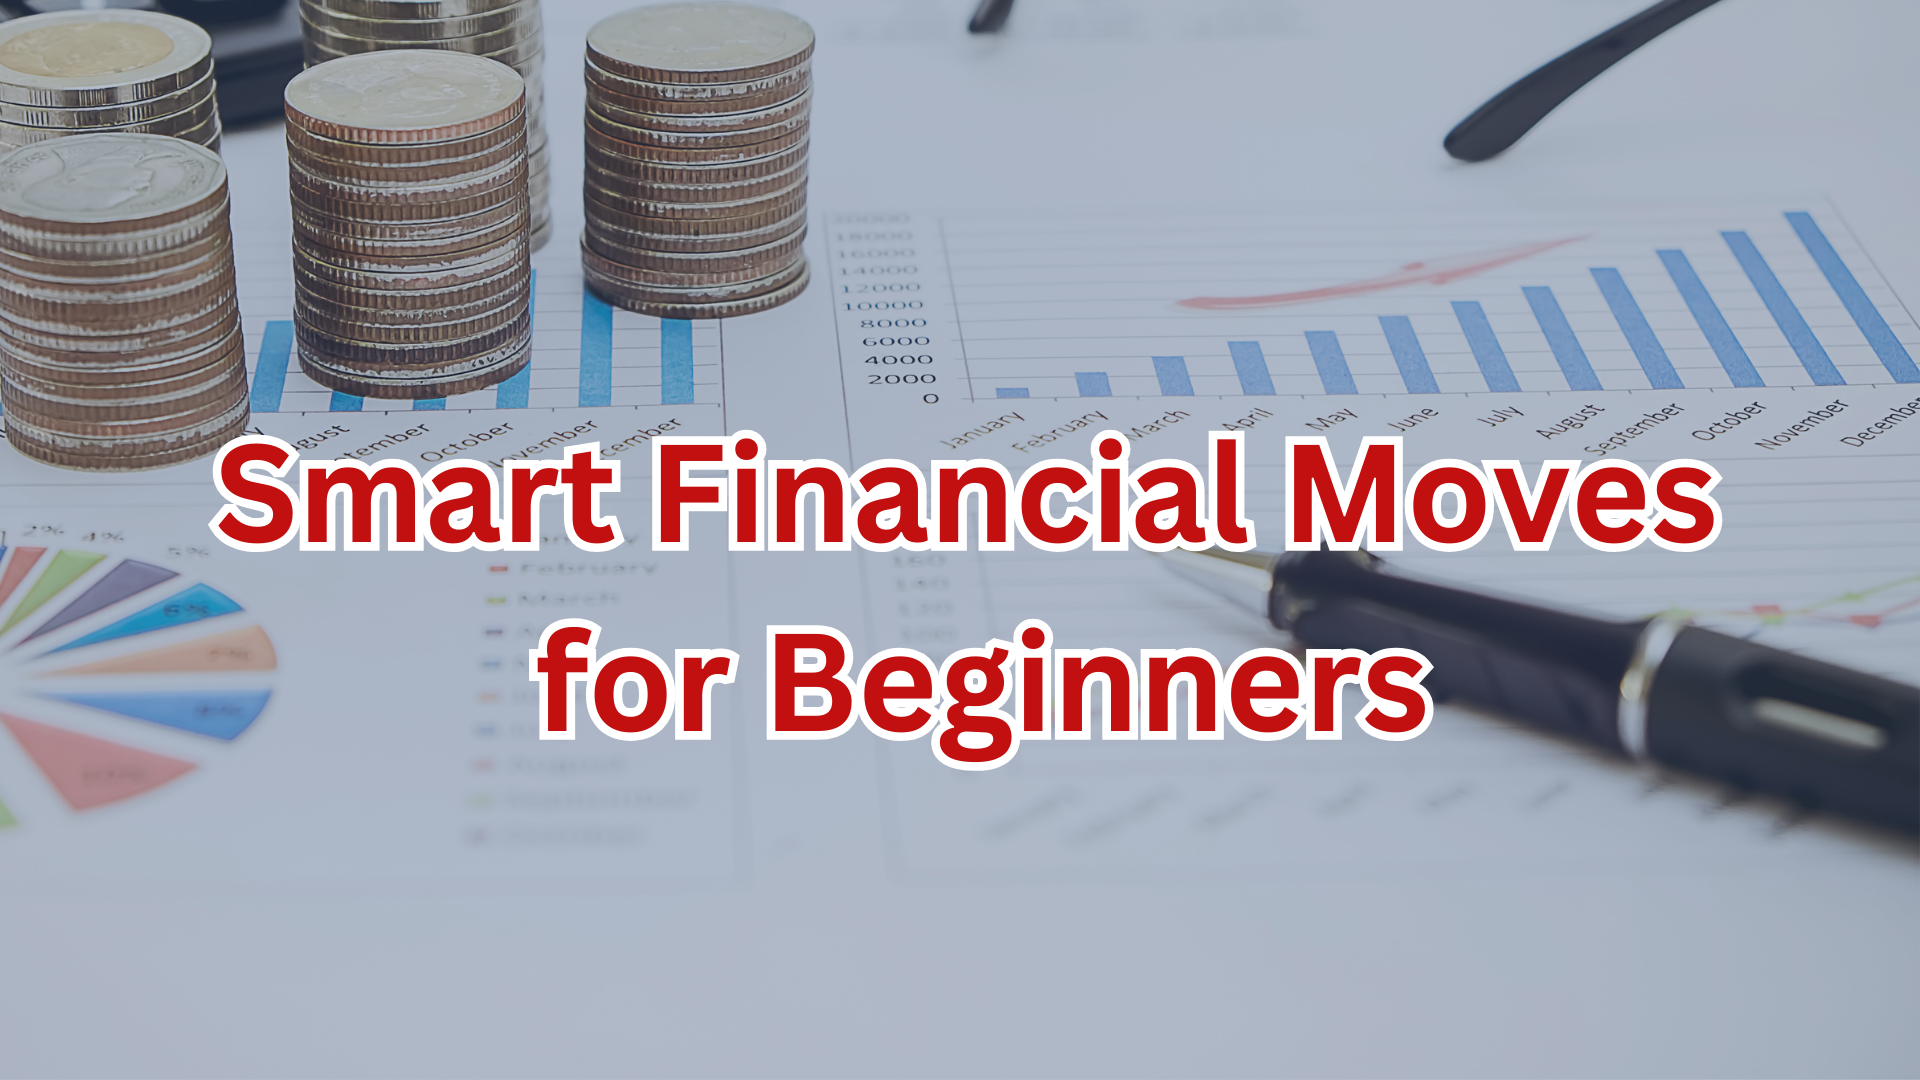 Smart Financial Moves for Beginners